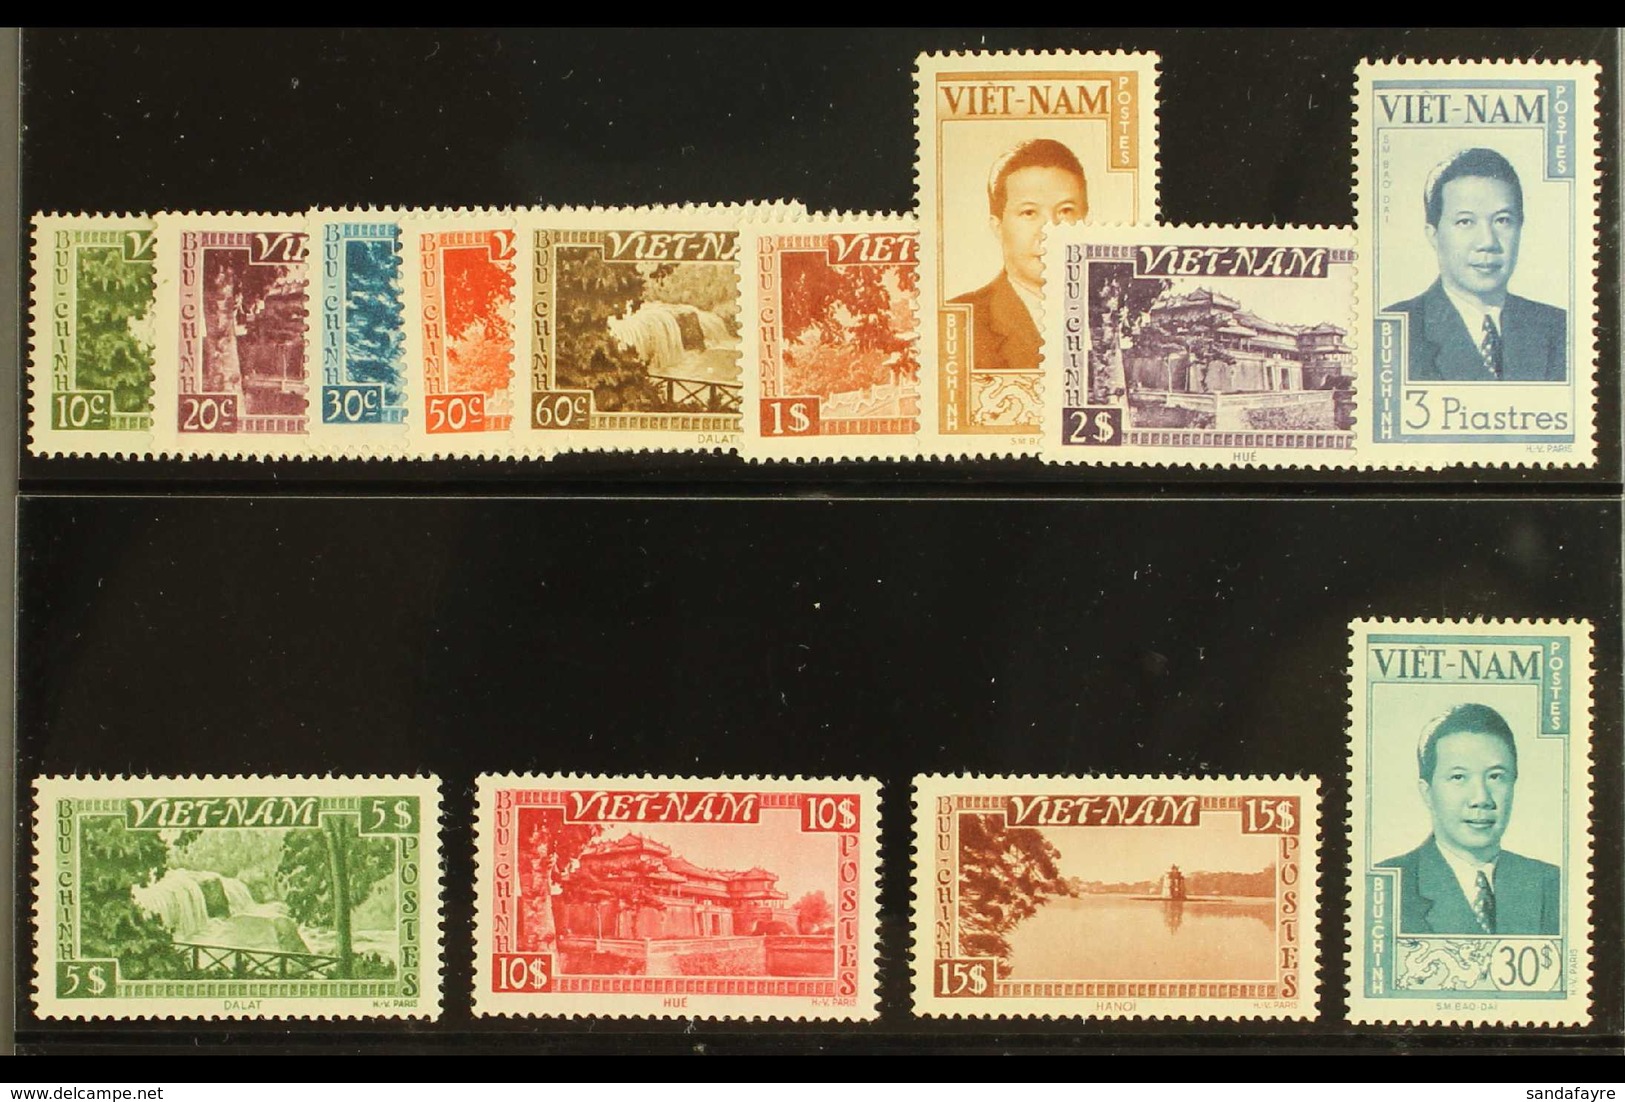 INDEPENDENT STATE 1951 Definitives Complete Set (SG 61/73, Scott 1/13) Very Fine Never Hinged Mint. (13 Stamps) For More - Vietnam